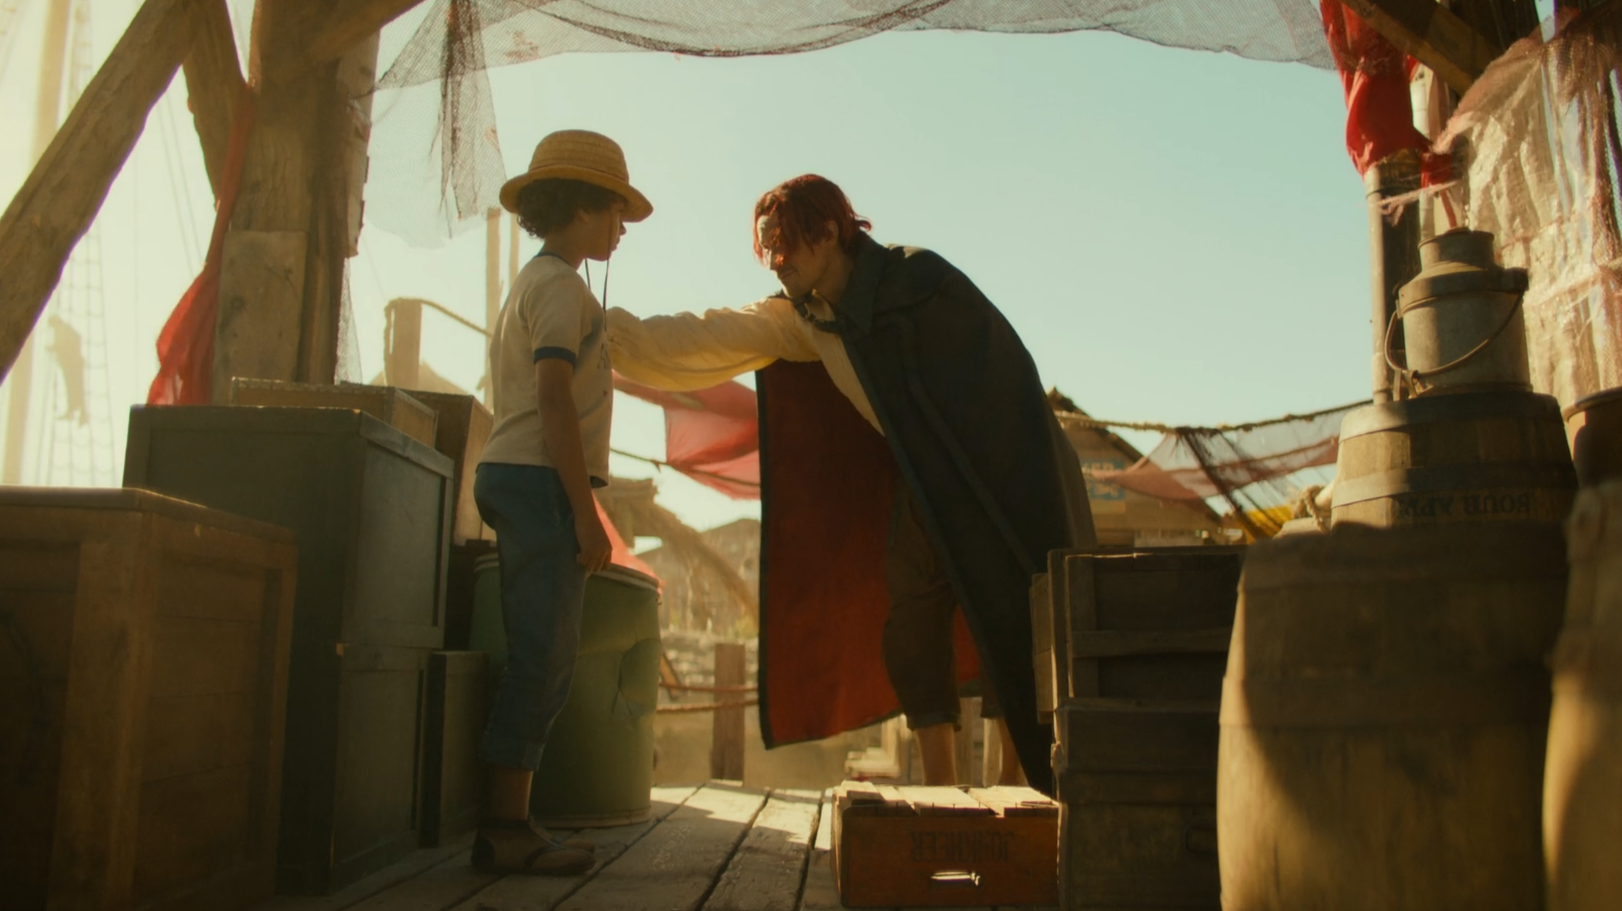 One Piece Live Action Episode 2 The Man In The Straw Hat Shanks Gives Luffy The Straw Hat